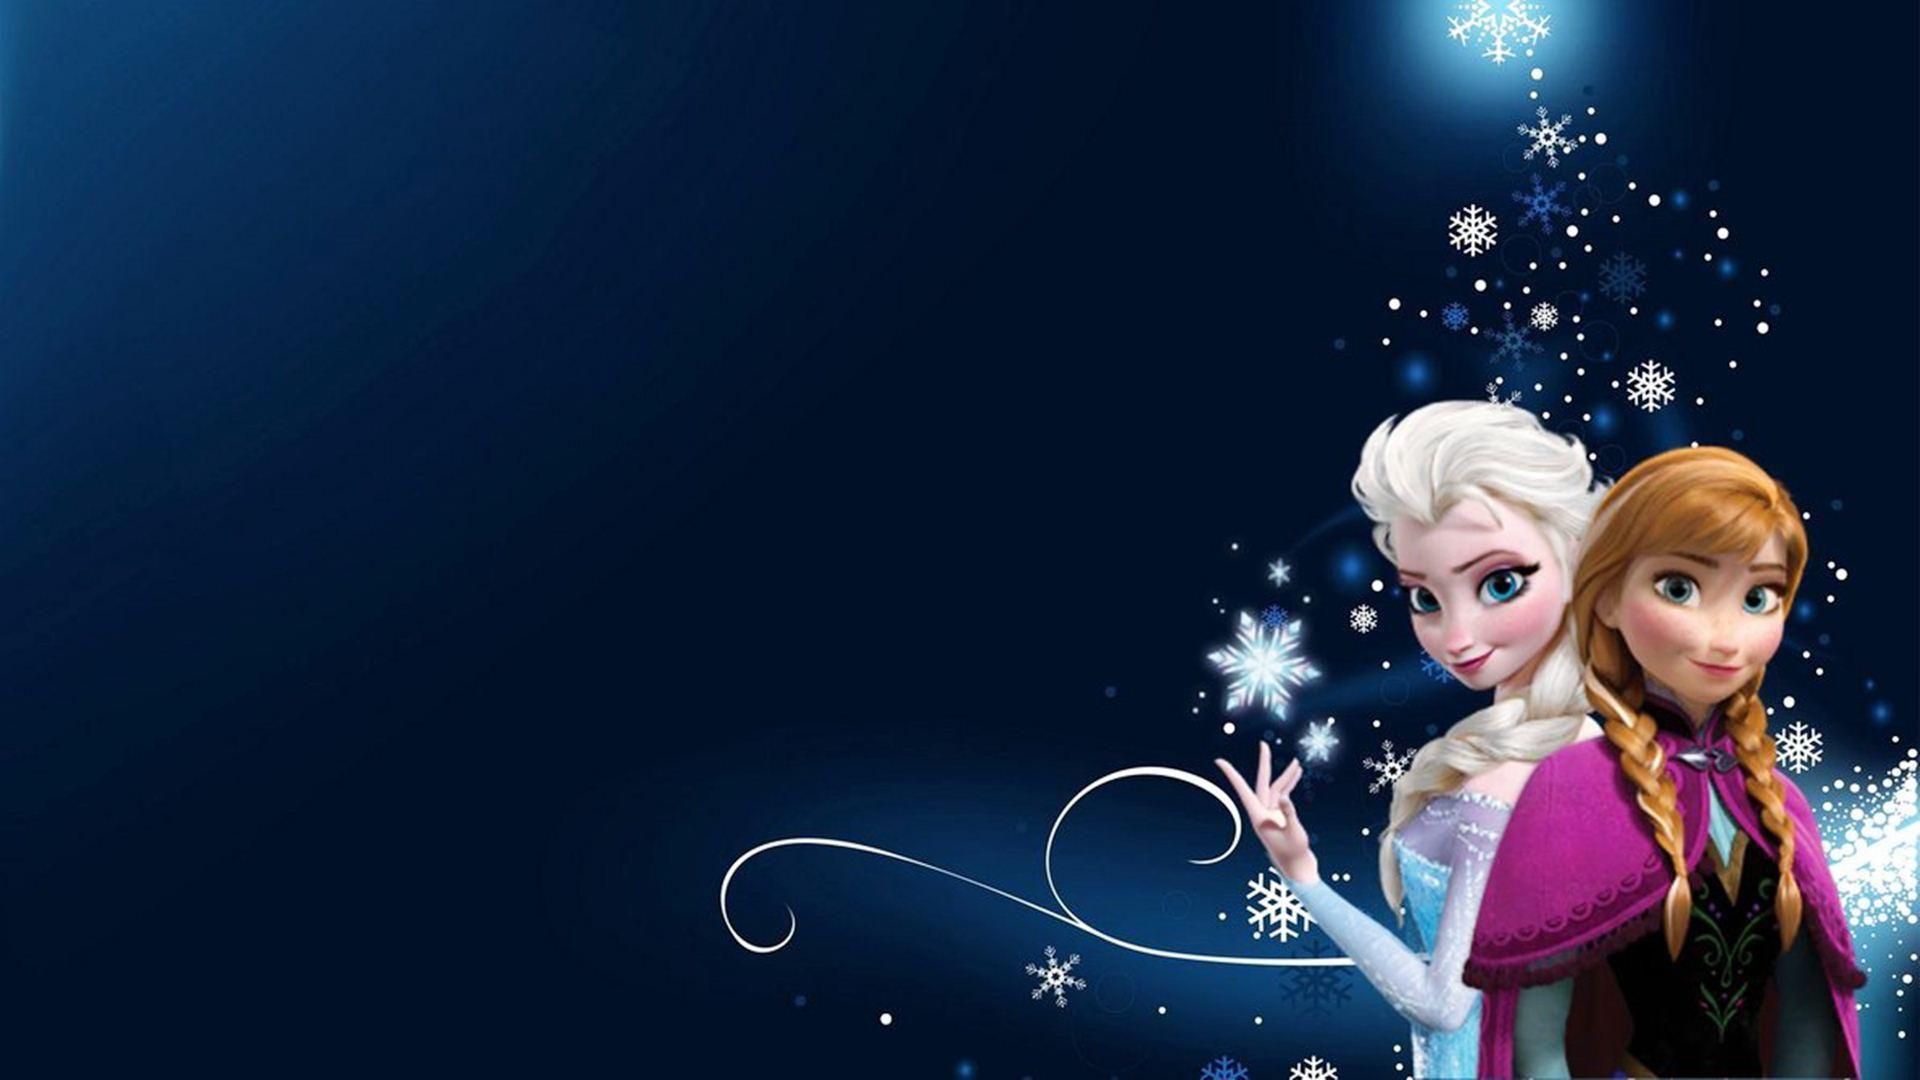 290+ Frozen HD Wallpapers and Backgrounds